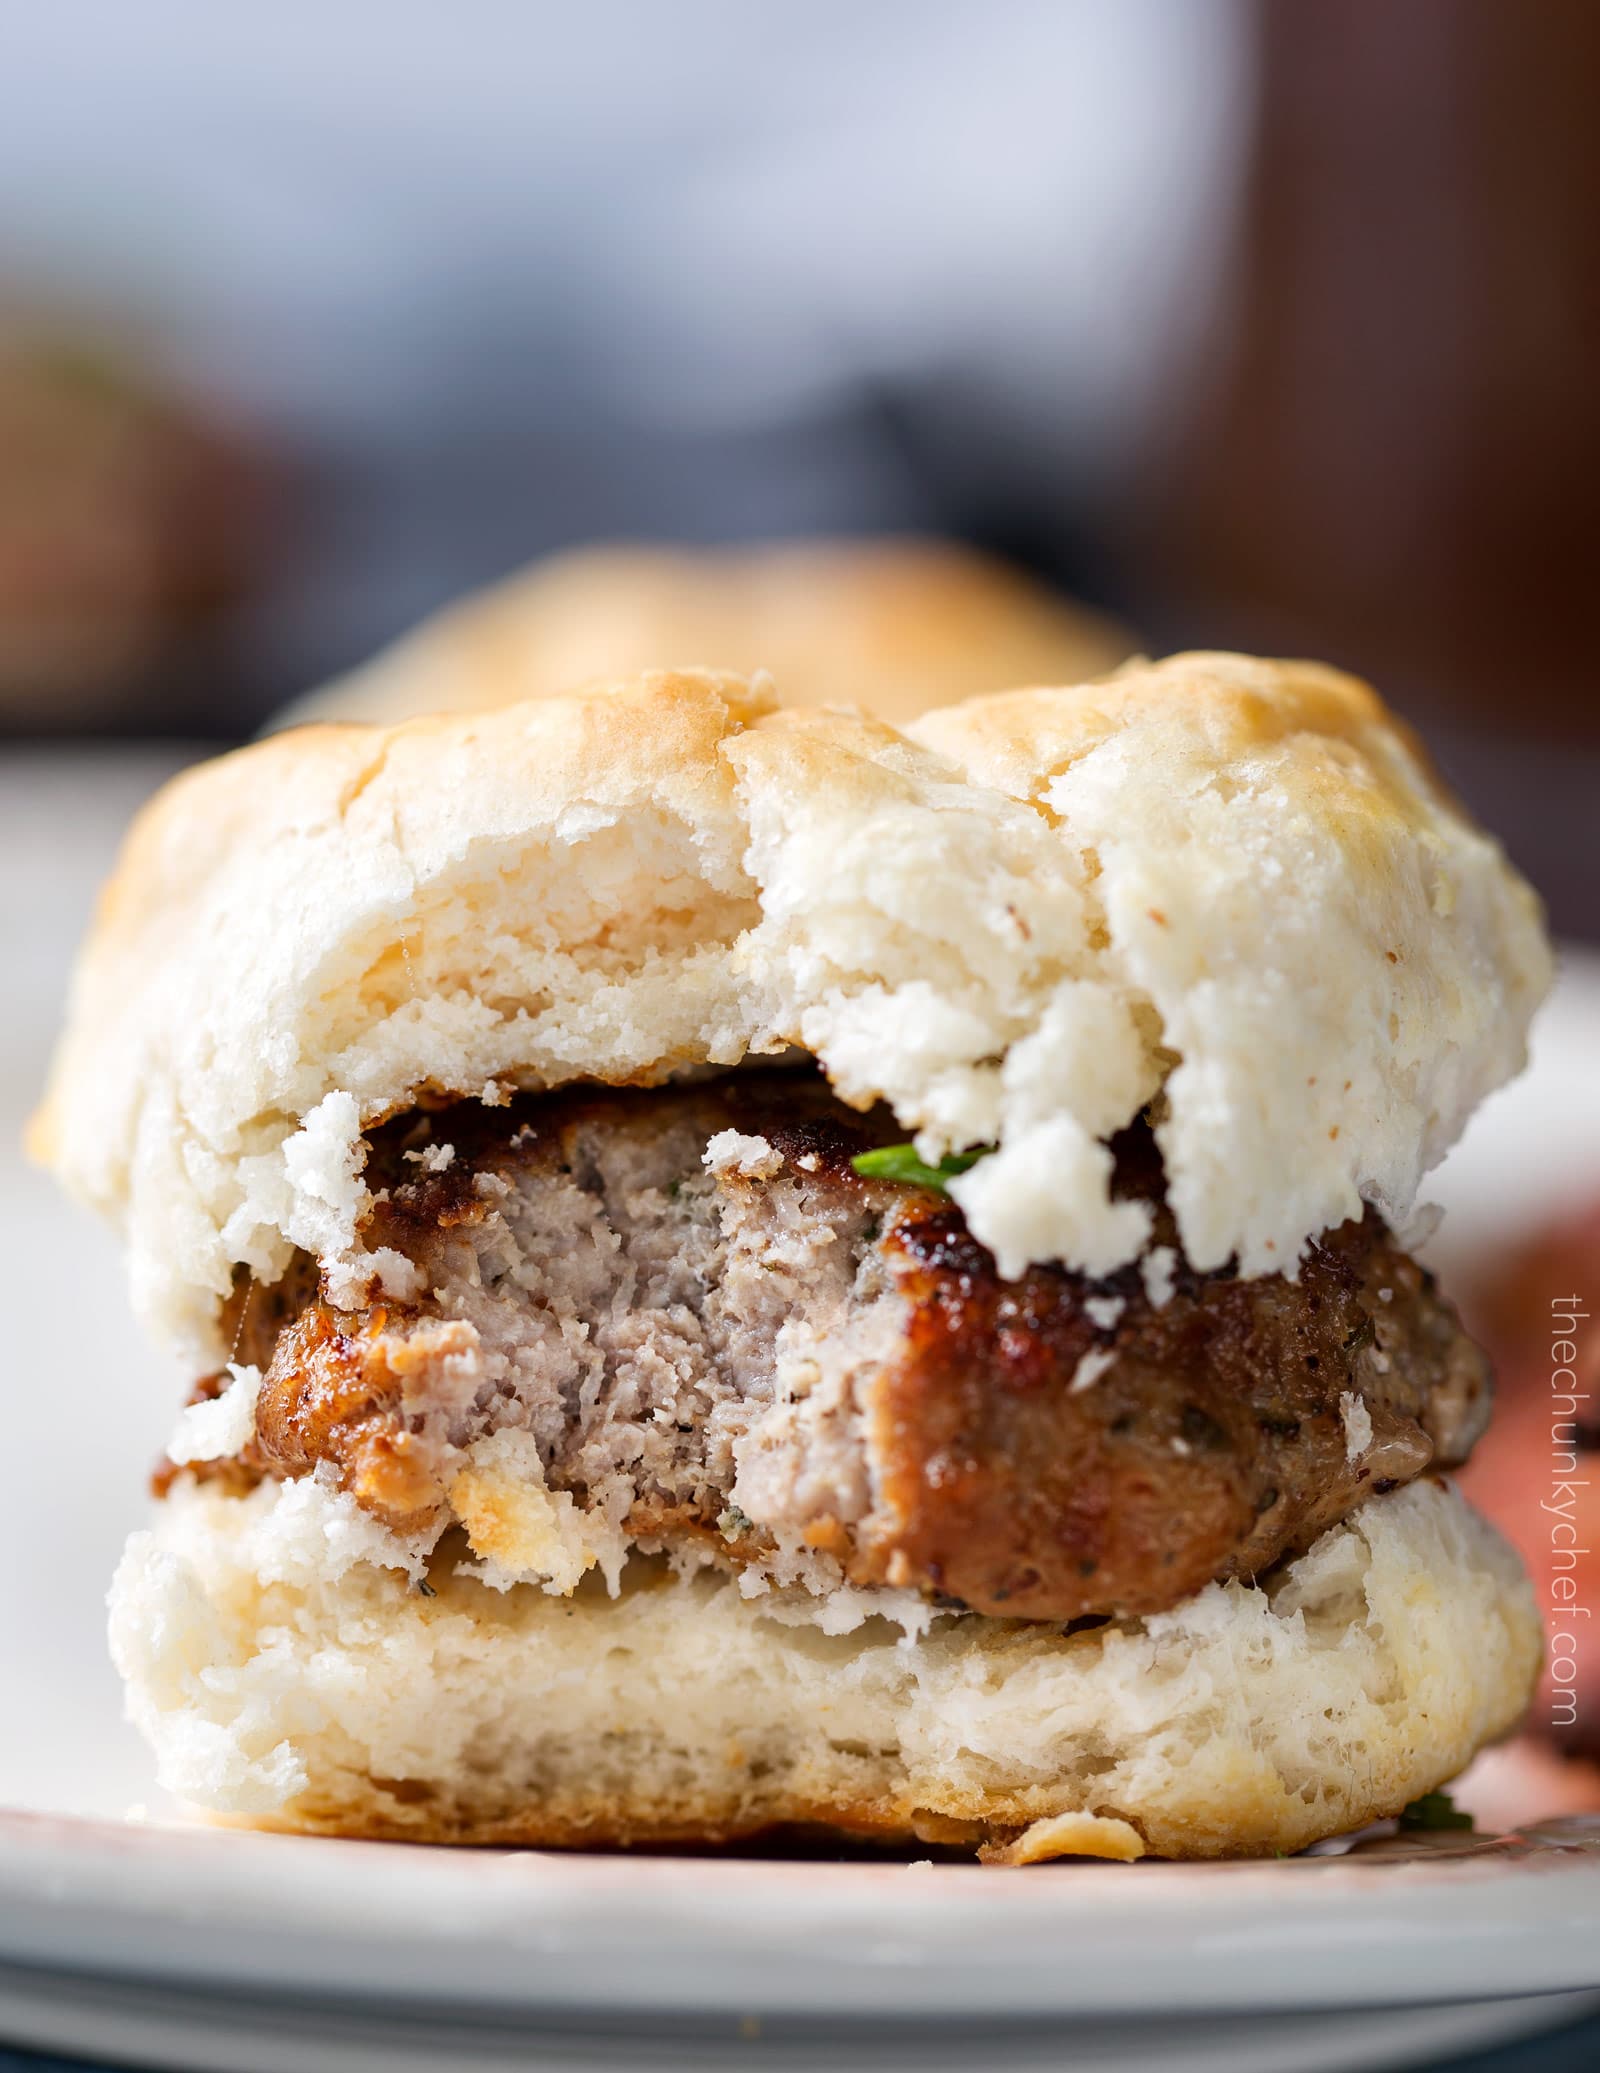 Homemade Maple Breakfast Sausage | These breakfast sausage patties are made with a combo of ground turkey and pork, savory herbs, and sweet maple syrup. The mouthwatering combo gives way to a low calorie homemade version of your favorite breakfast food! | http://thechunkychef.com